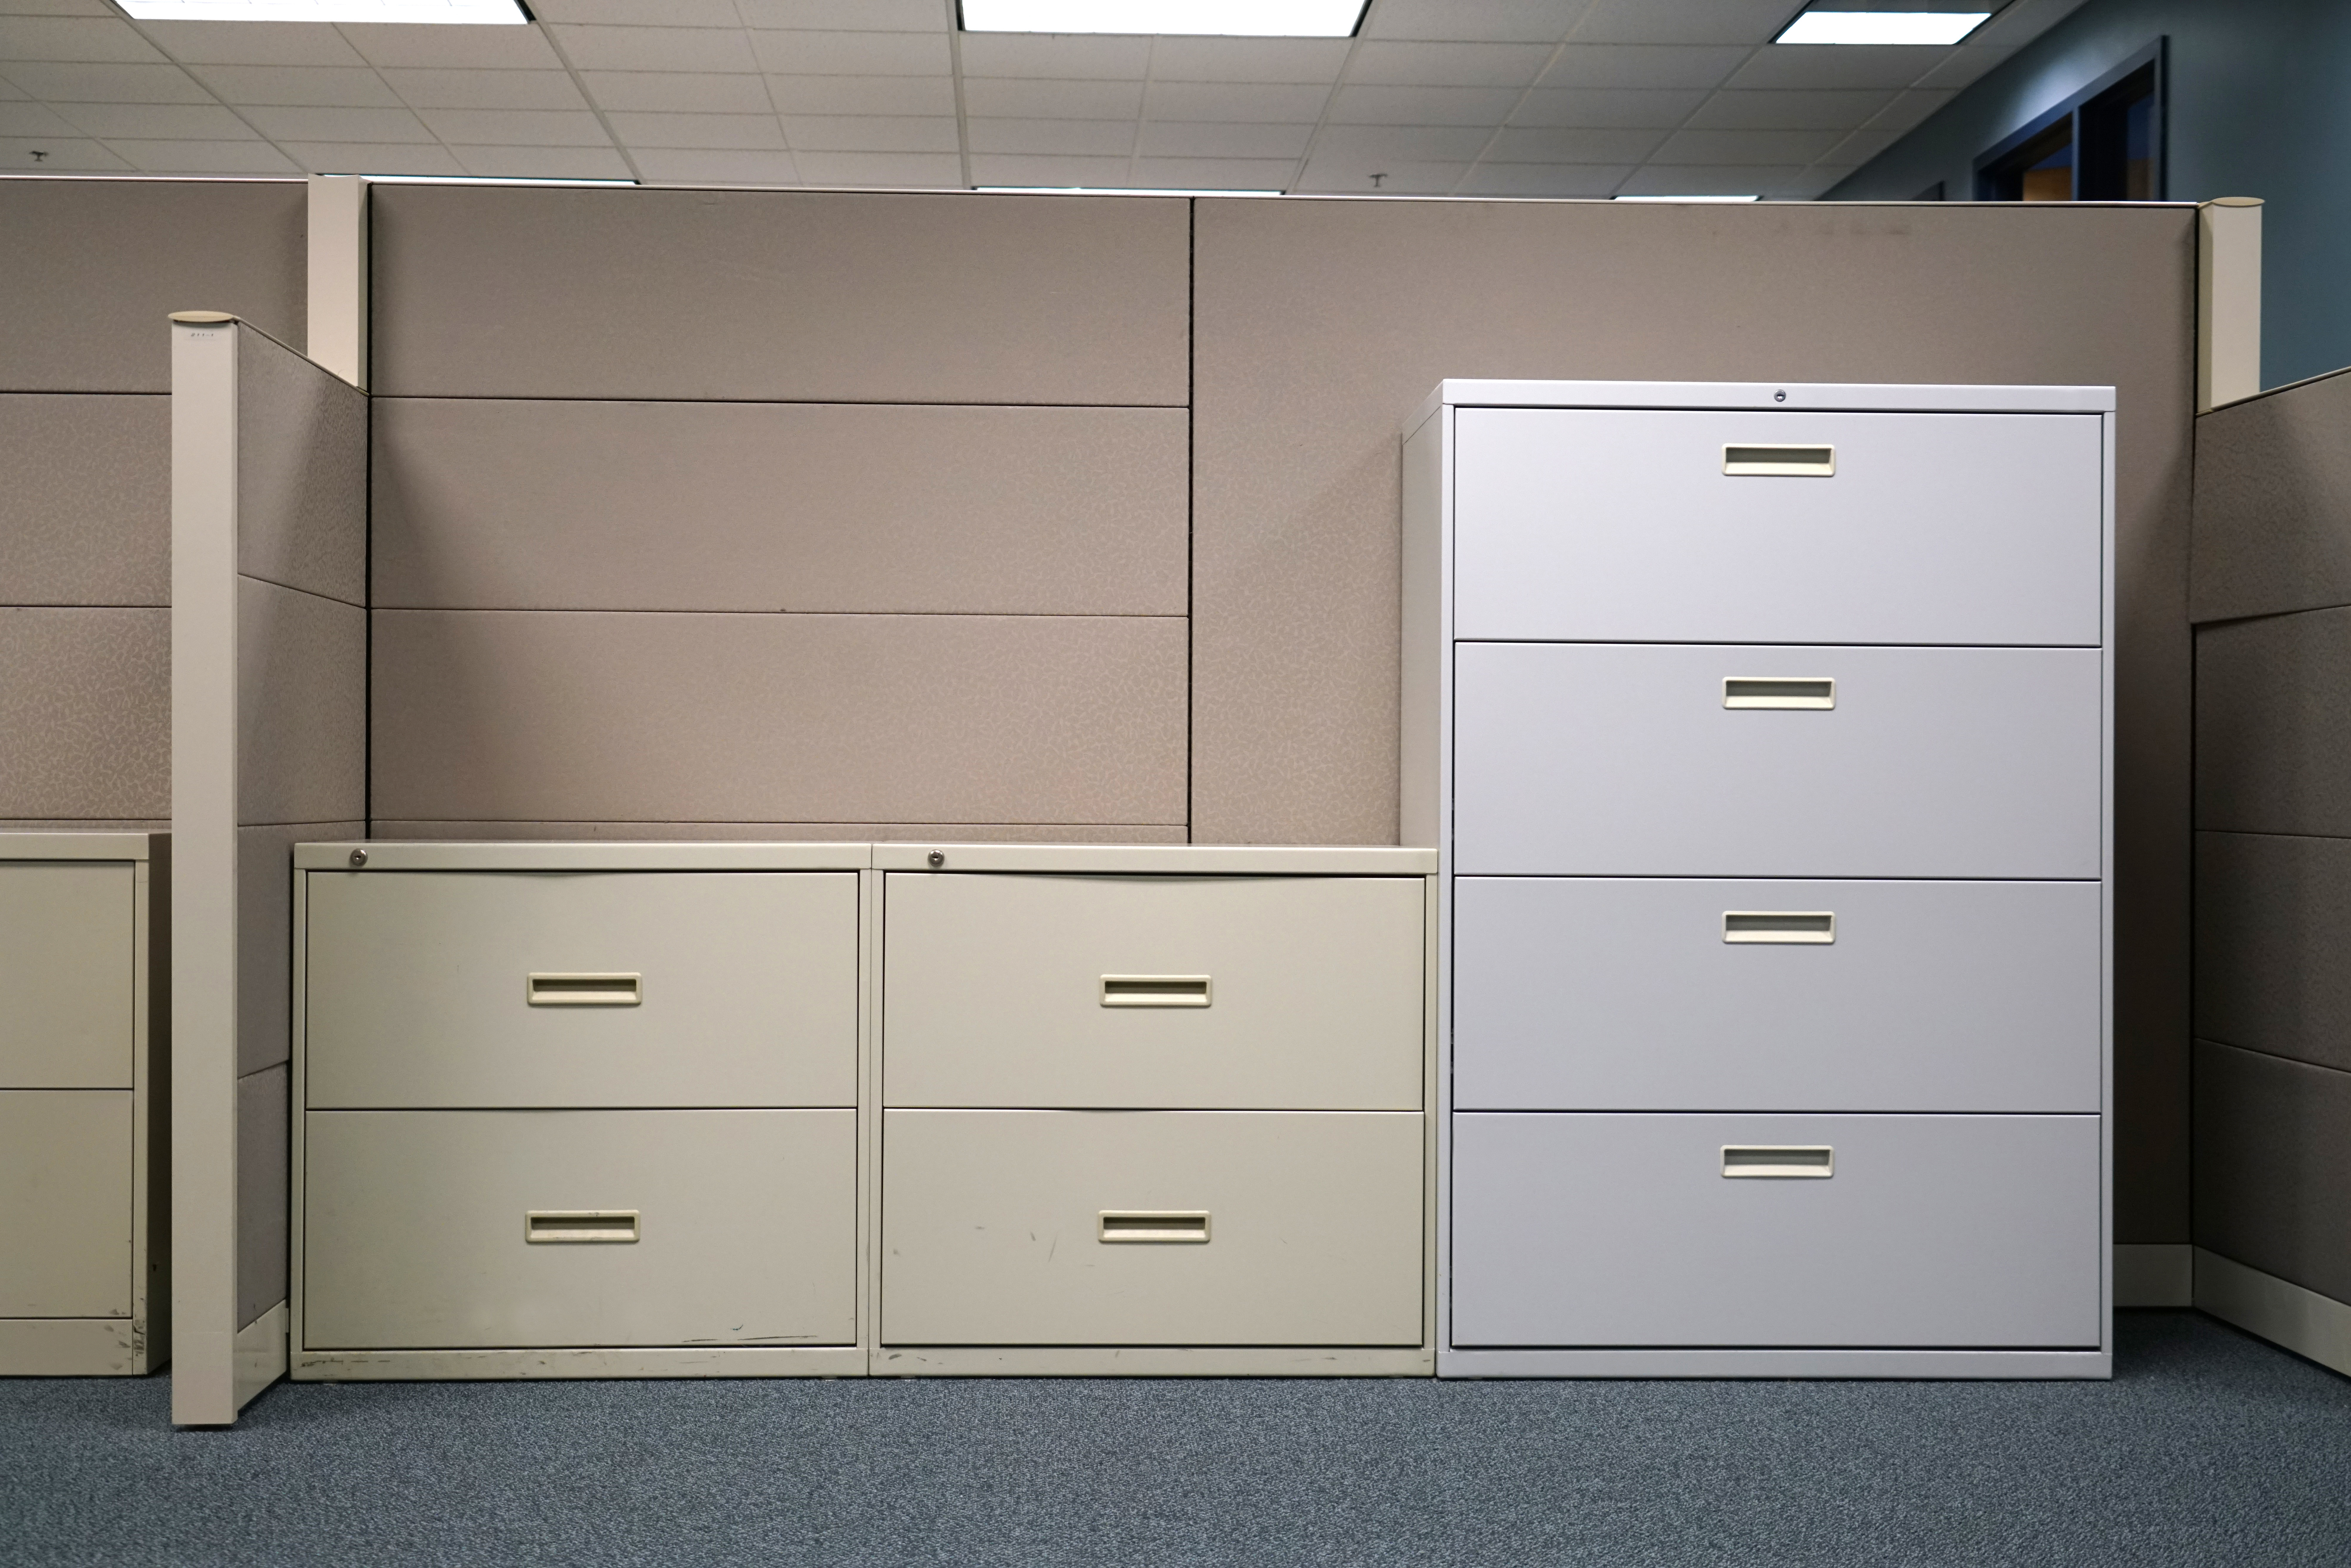 Unfade Memory Metal Filing Cabinet with 5 Drawers Store Your Files and Office Supplies in an Orderly Way White 